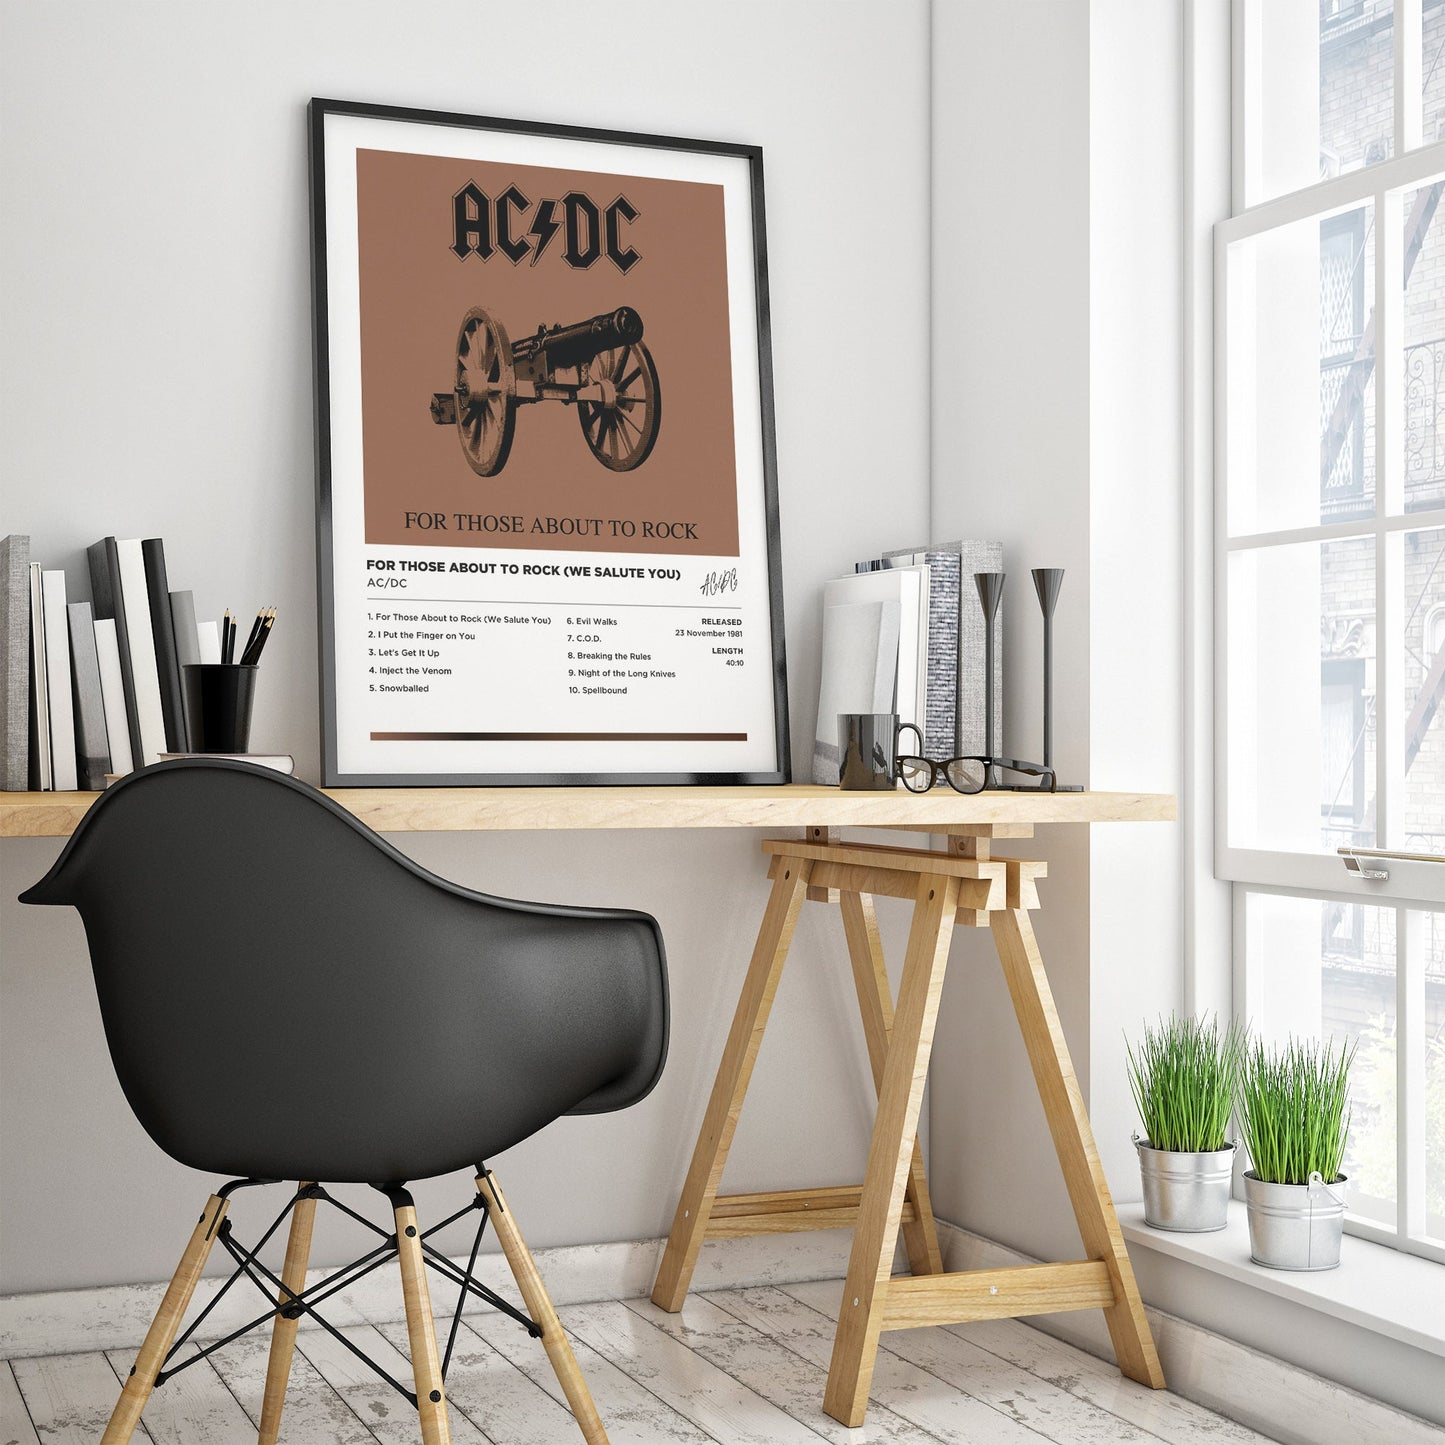 ACDC - For Those About to Rock (We Salute You) Framed Poster Print | Polaroid Style | Album Cover Artwork